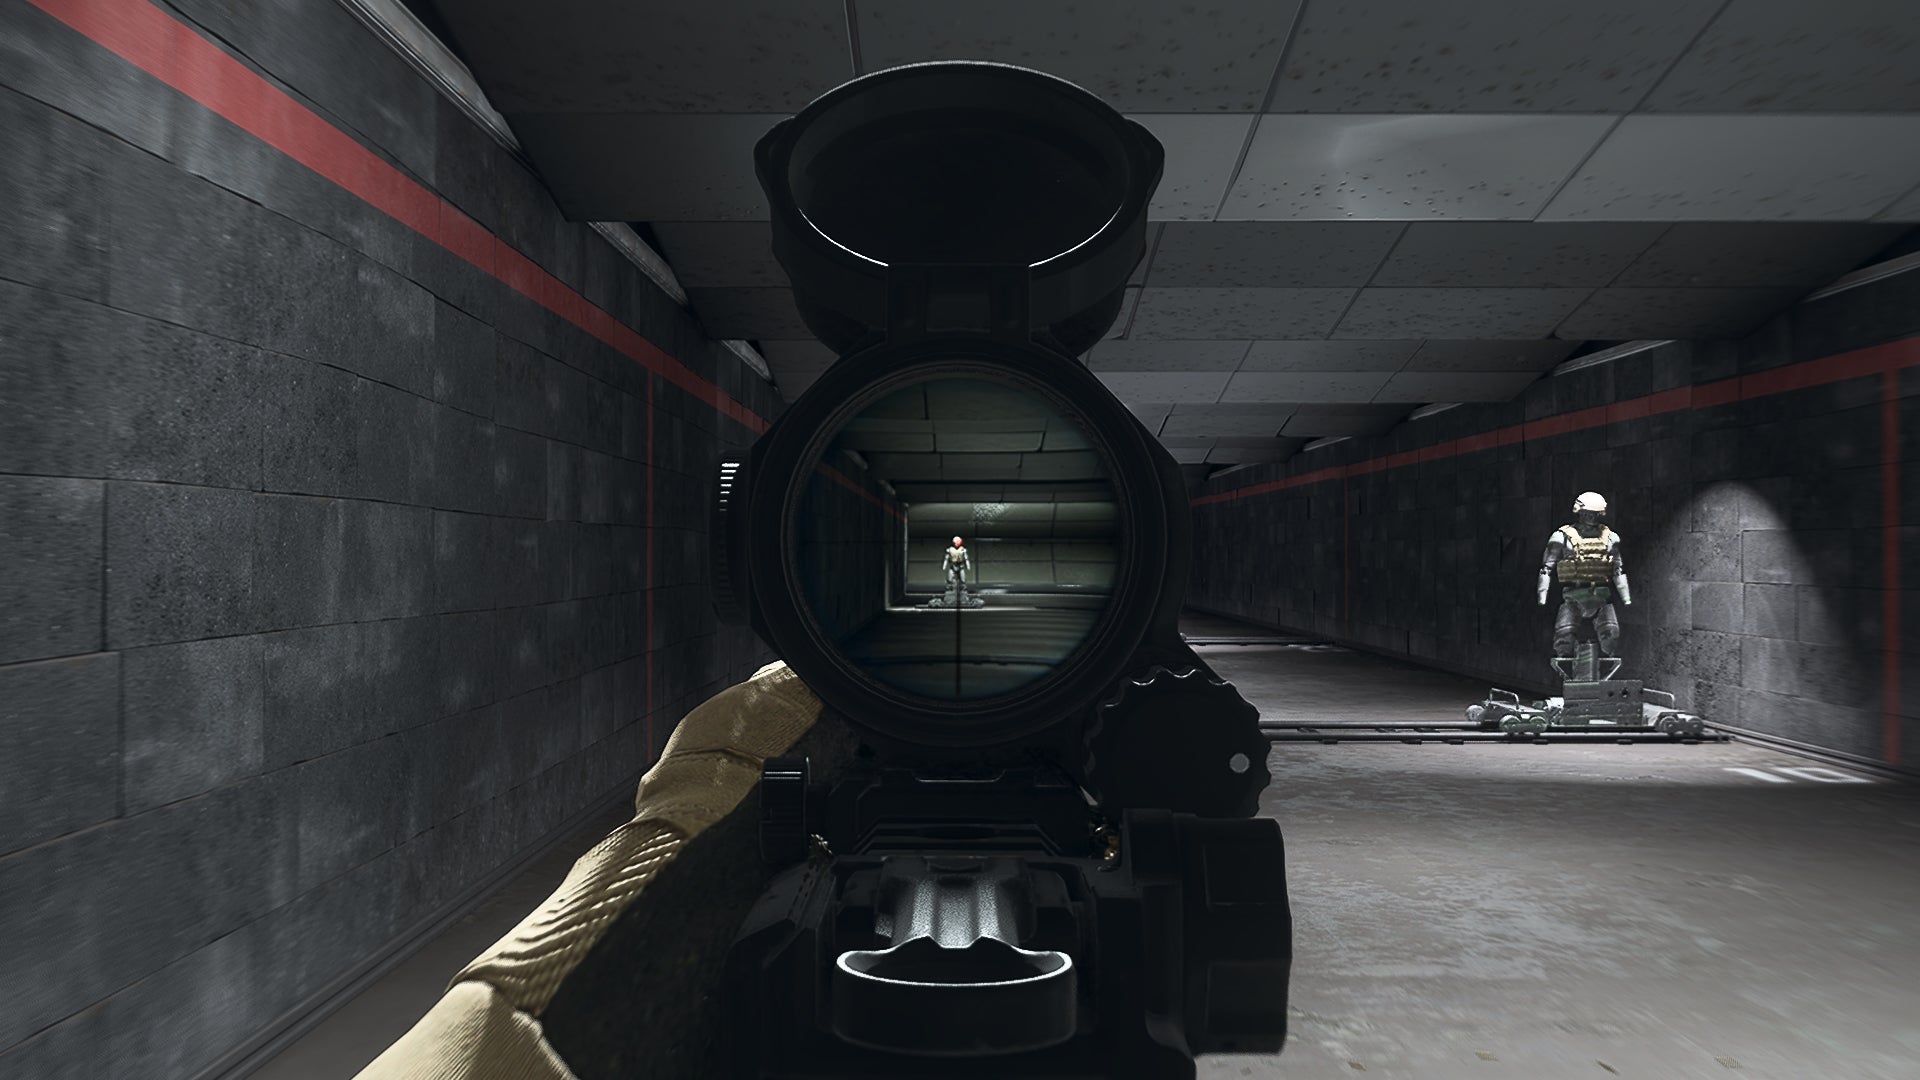 The player in Warzone 2.0 aims at a training dummy using the SZ SRO7 optic attachment.